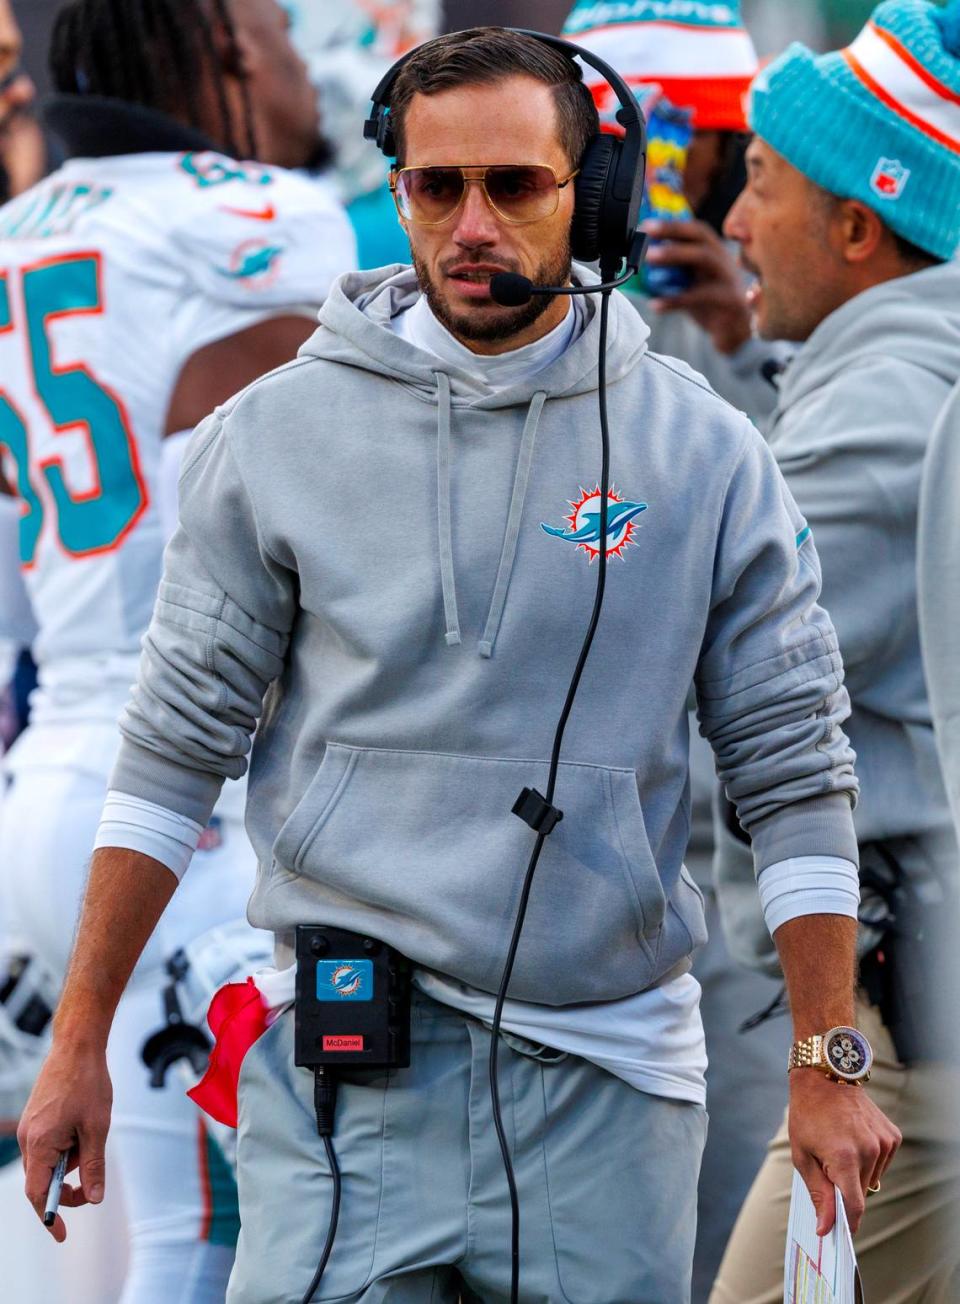 Miami Dolphins head coach Mike McDaniel looks from the sidelines before the start of an NFL football game against the New York Jets at MetLife Stadium on Friday, Nov. 24, 2023 in East Rutherford, New Jersey.